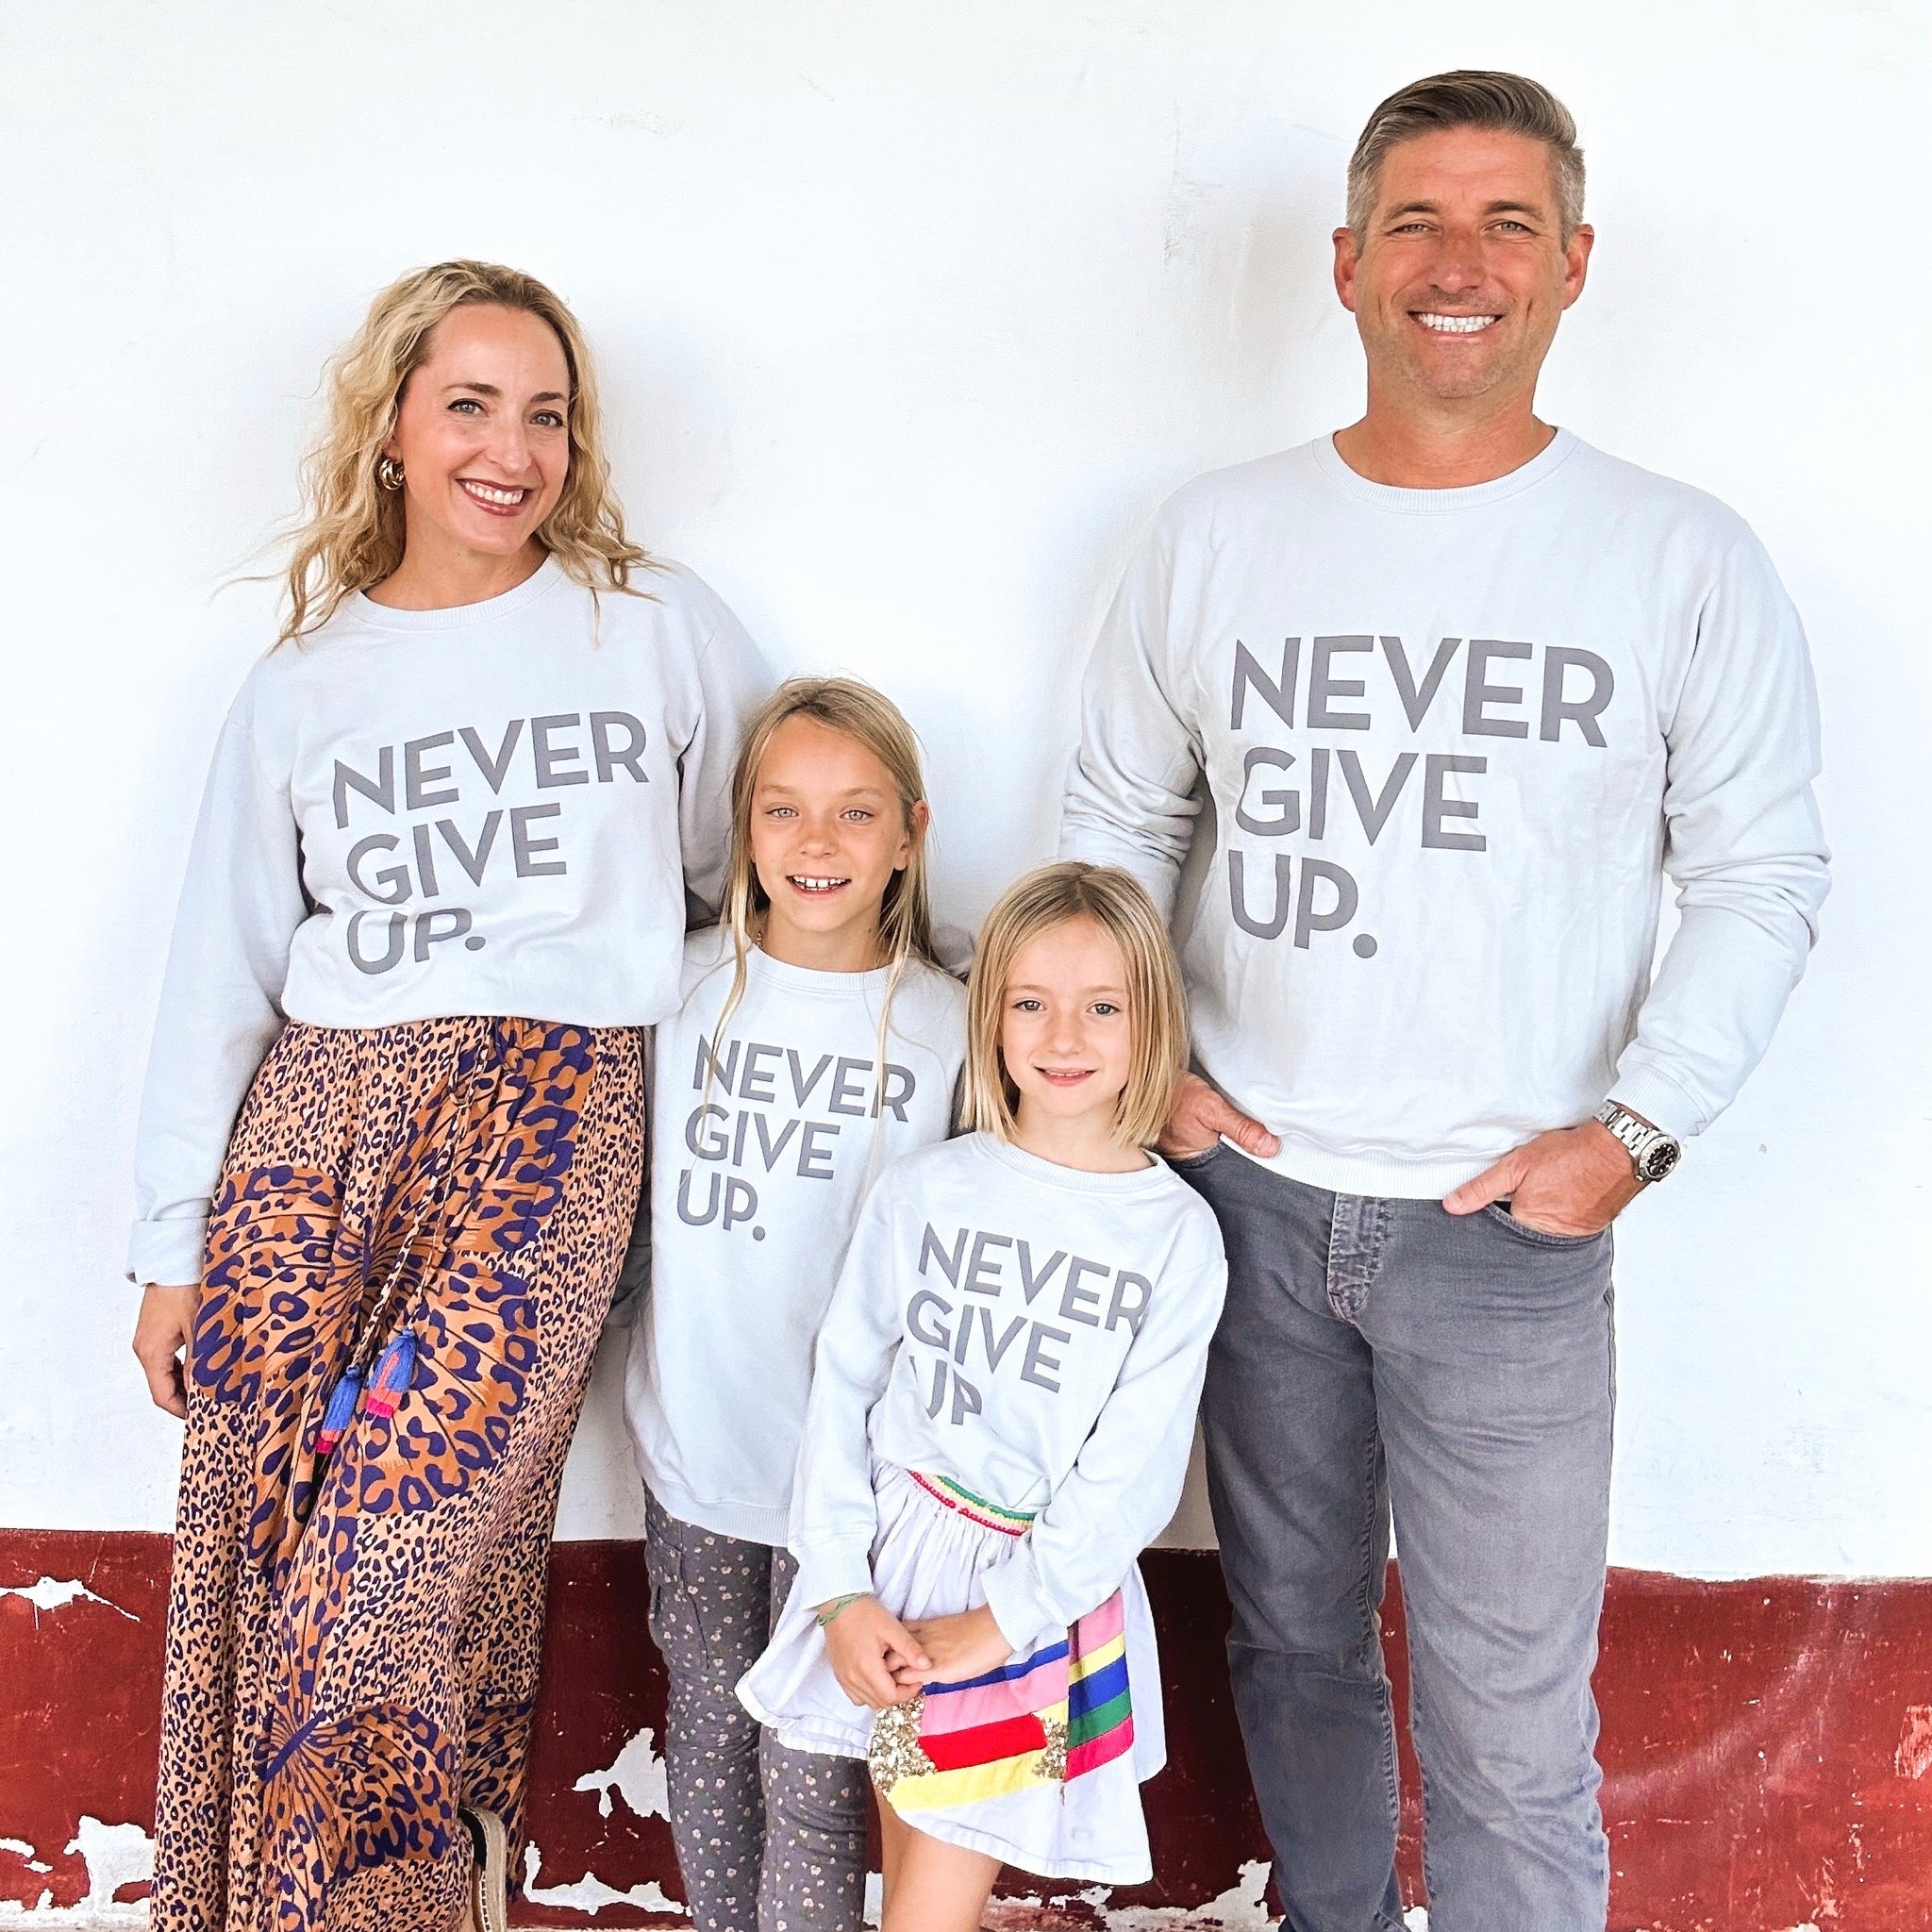 NEVER GIVE UP. GLACIER GRAY PULLOVER